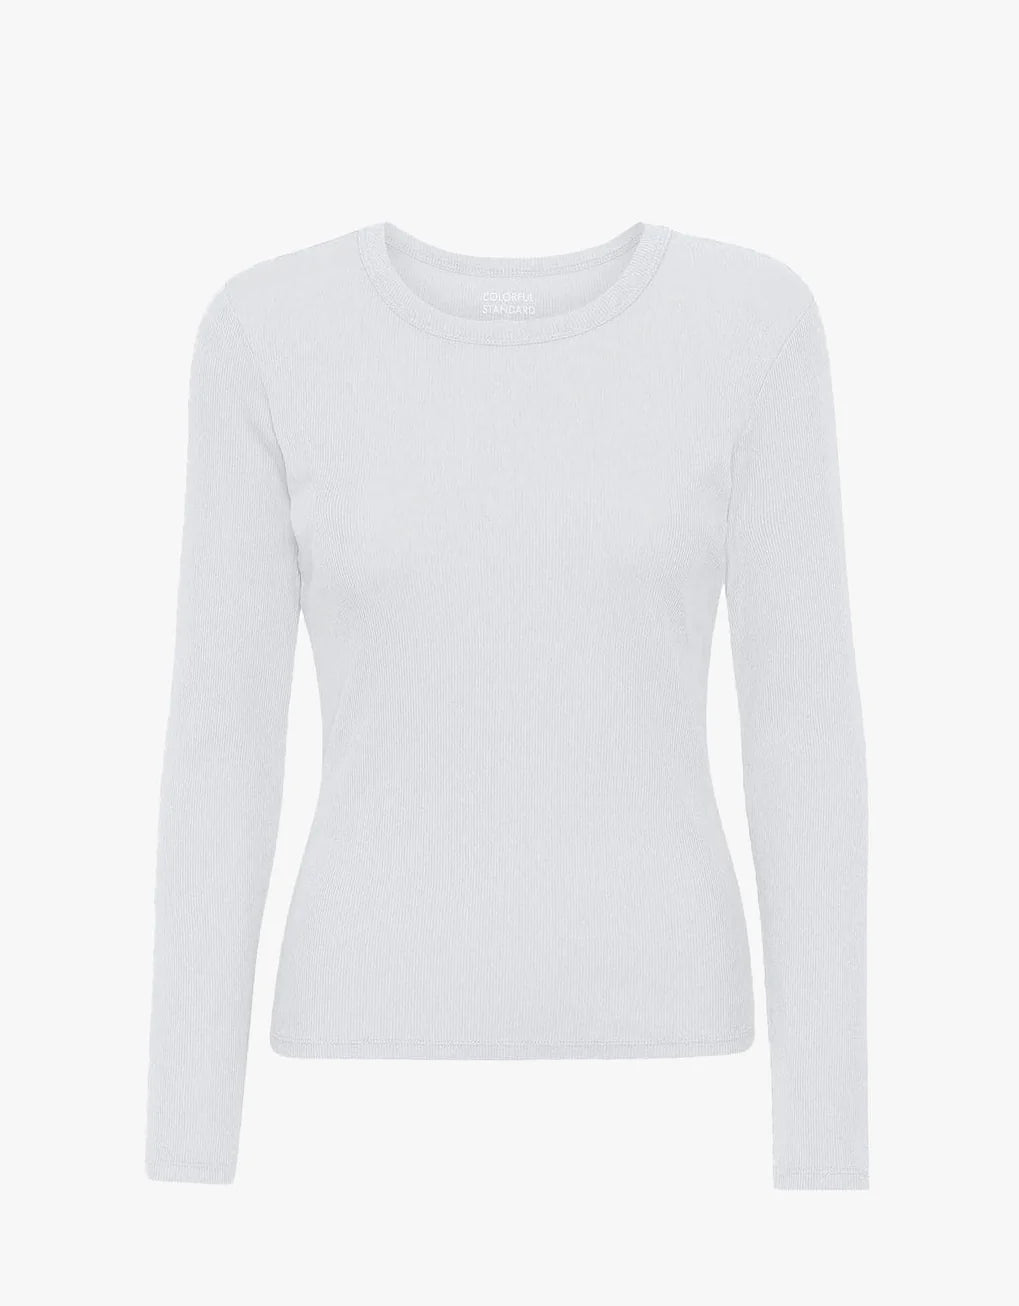 A Colorful Standard women's white long-sleeved tee made from organic cotton.